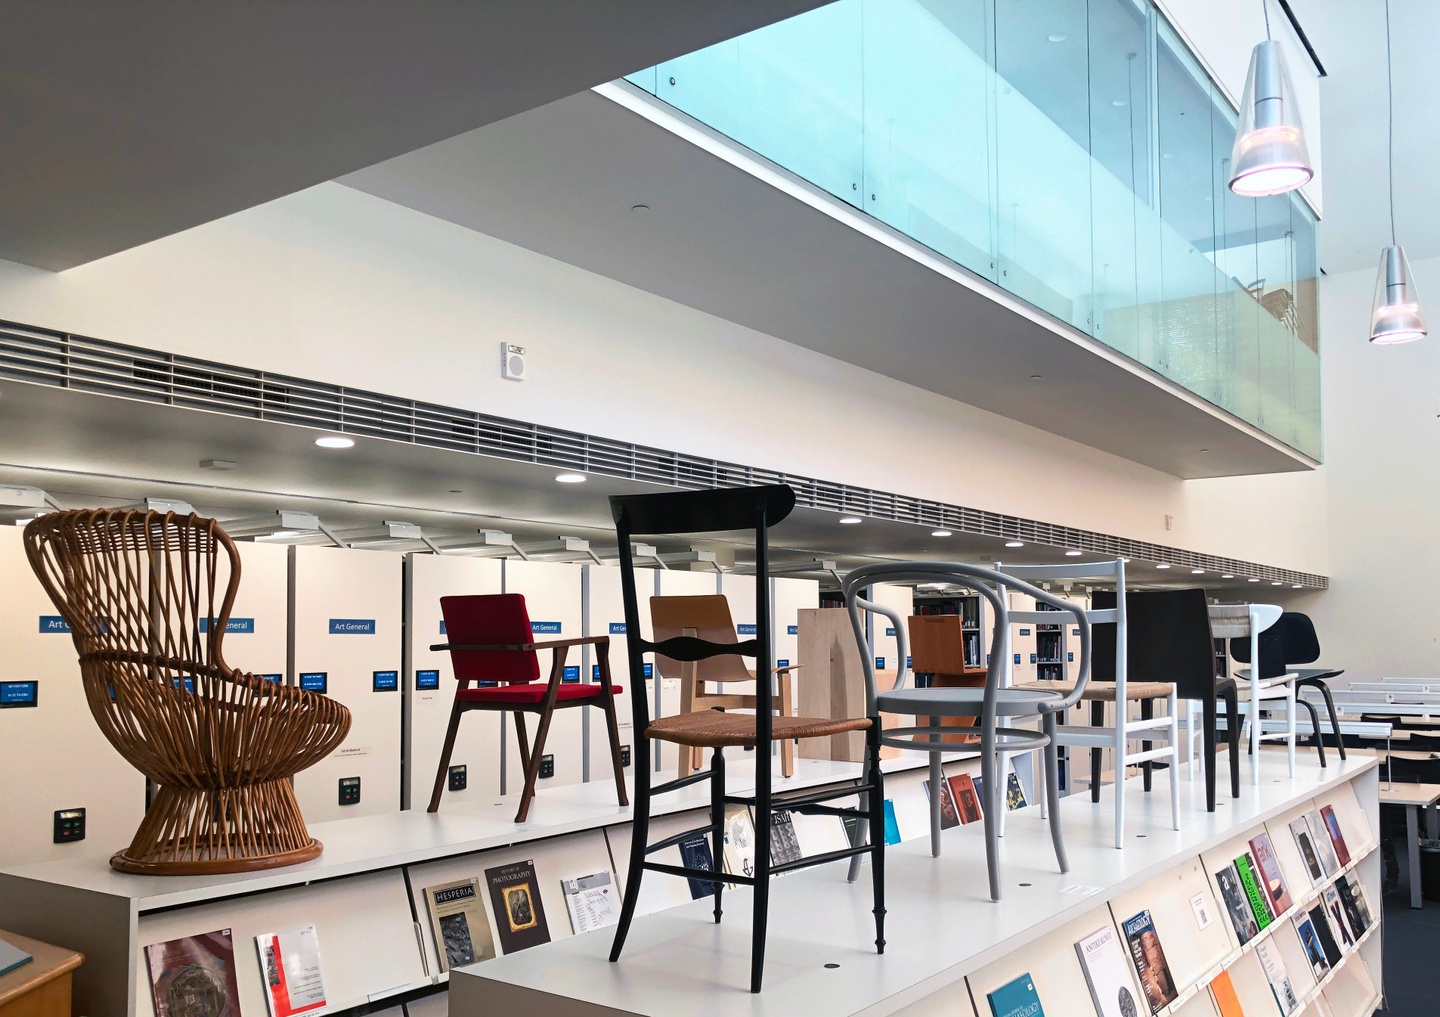 Exhibition of several architectural chairs, displayed atop a pair of magazine shelving units in the library.